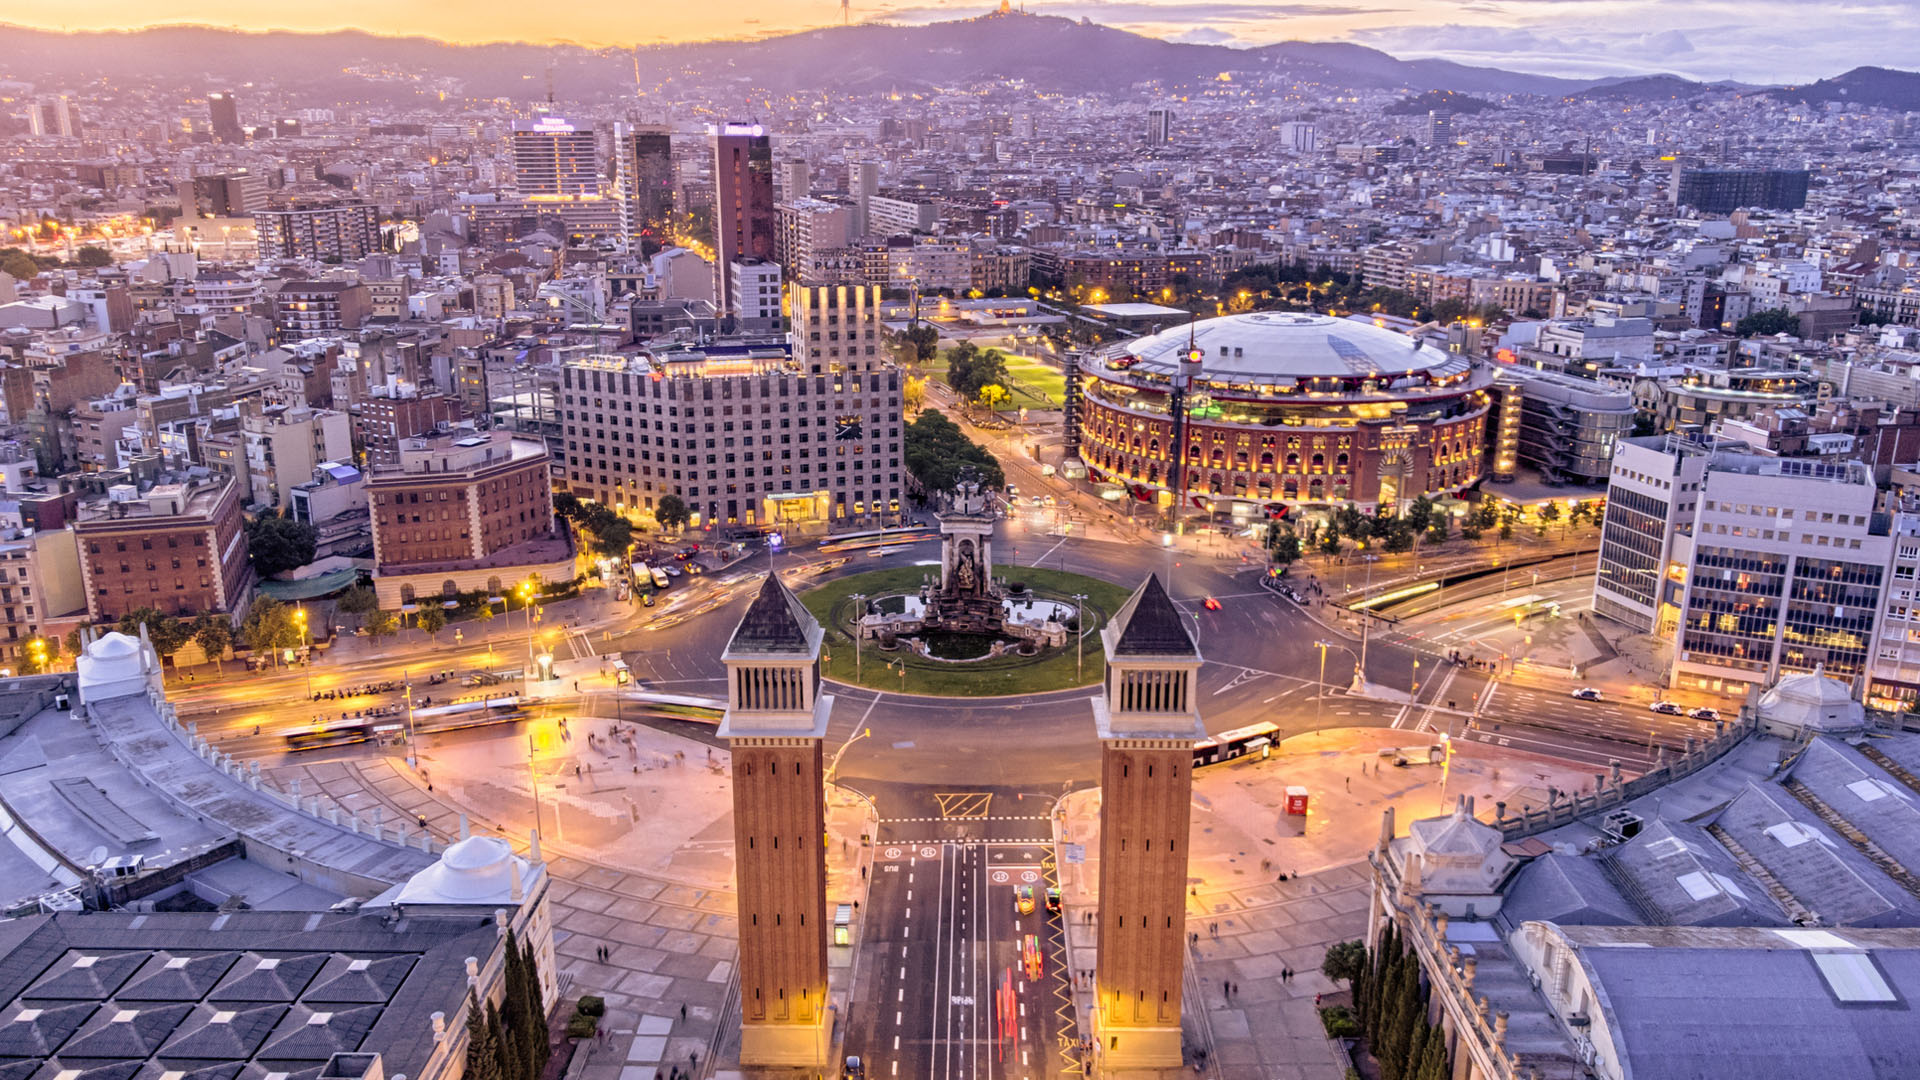 New attractions in Barcelona that nobody should miss (neither tourists nor locals)